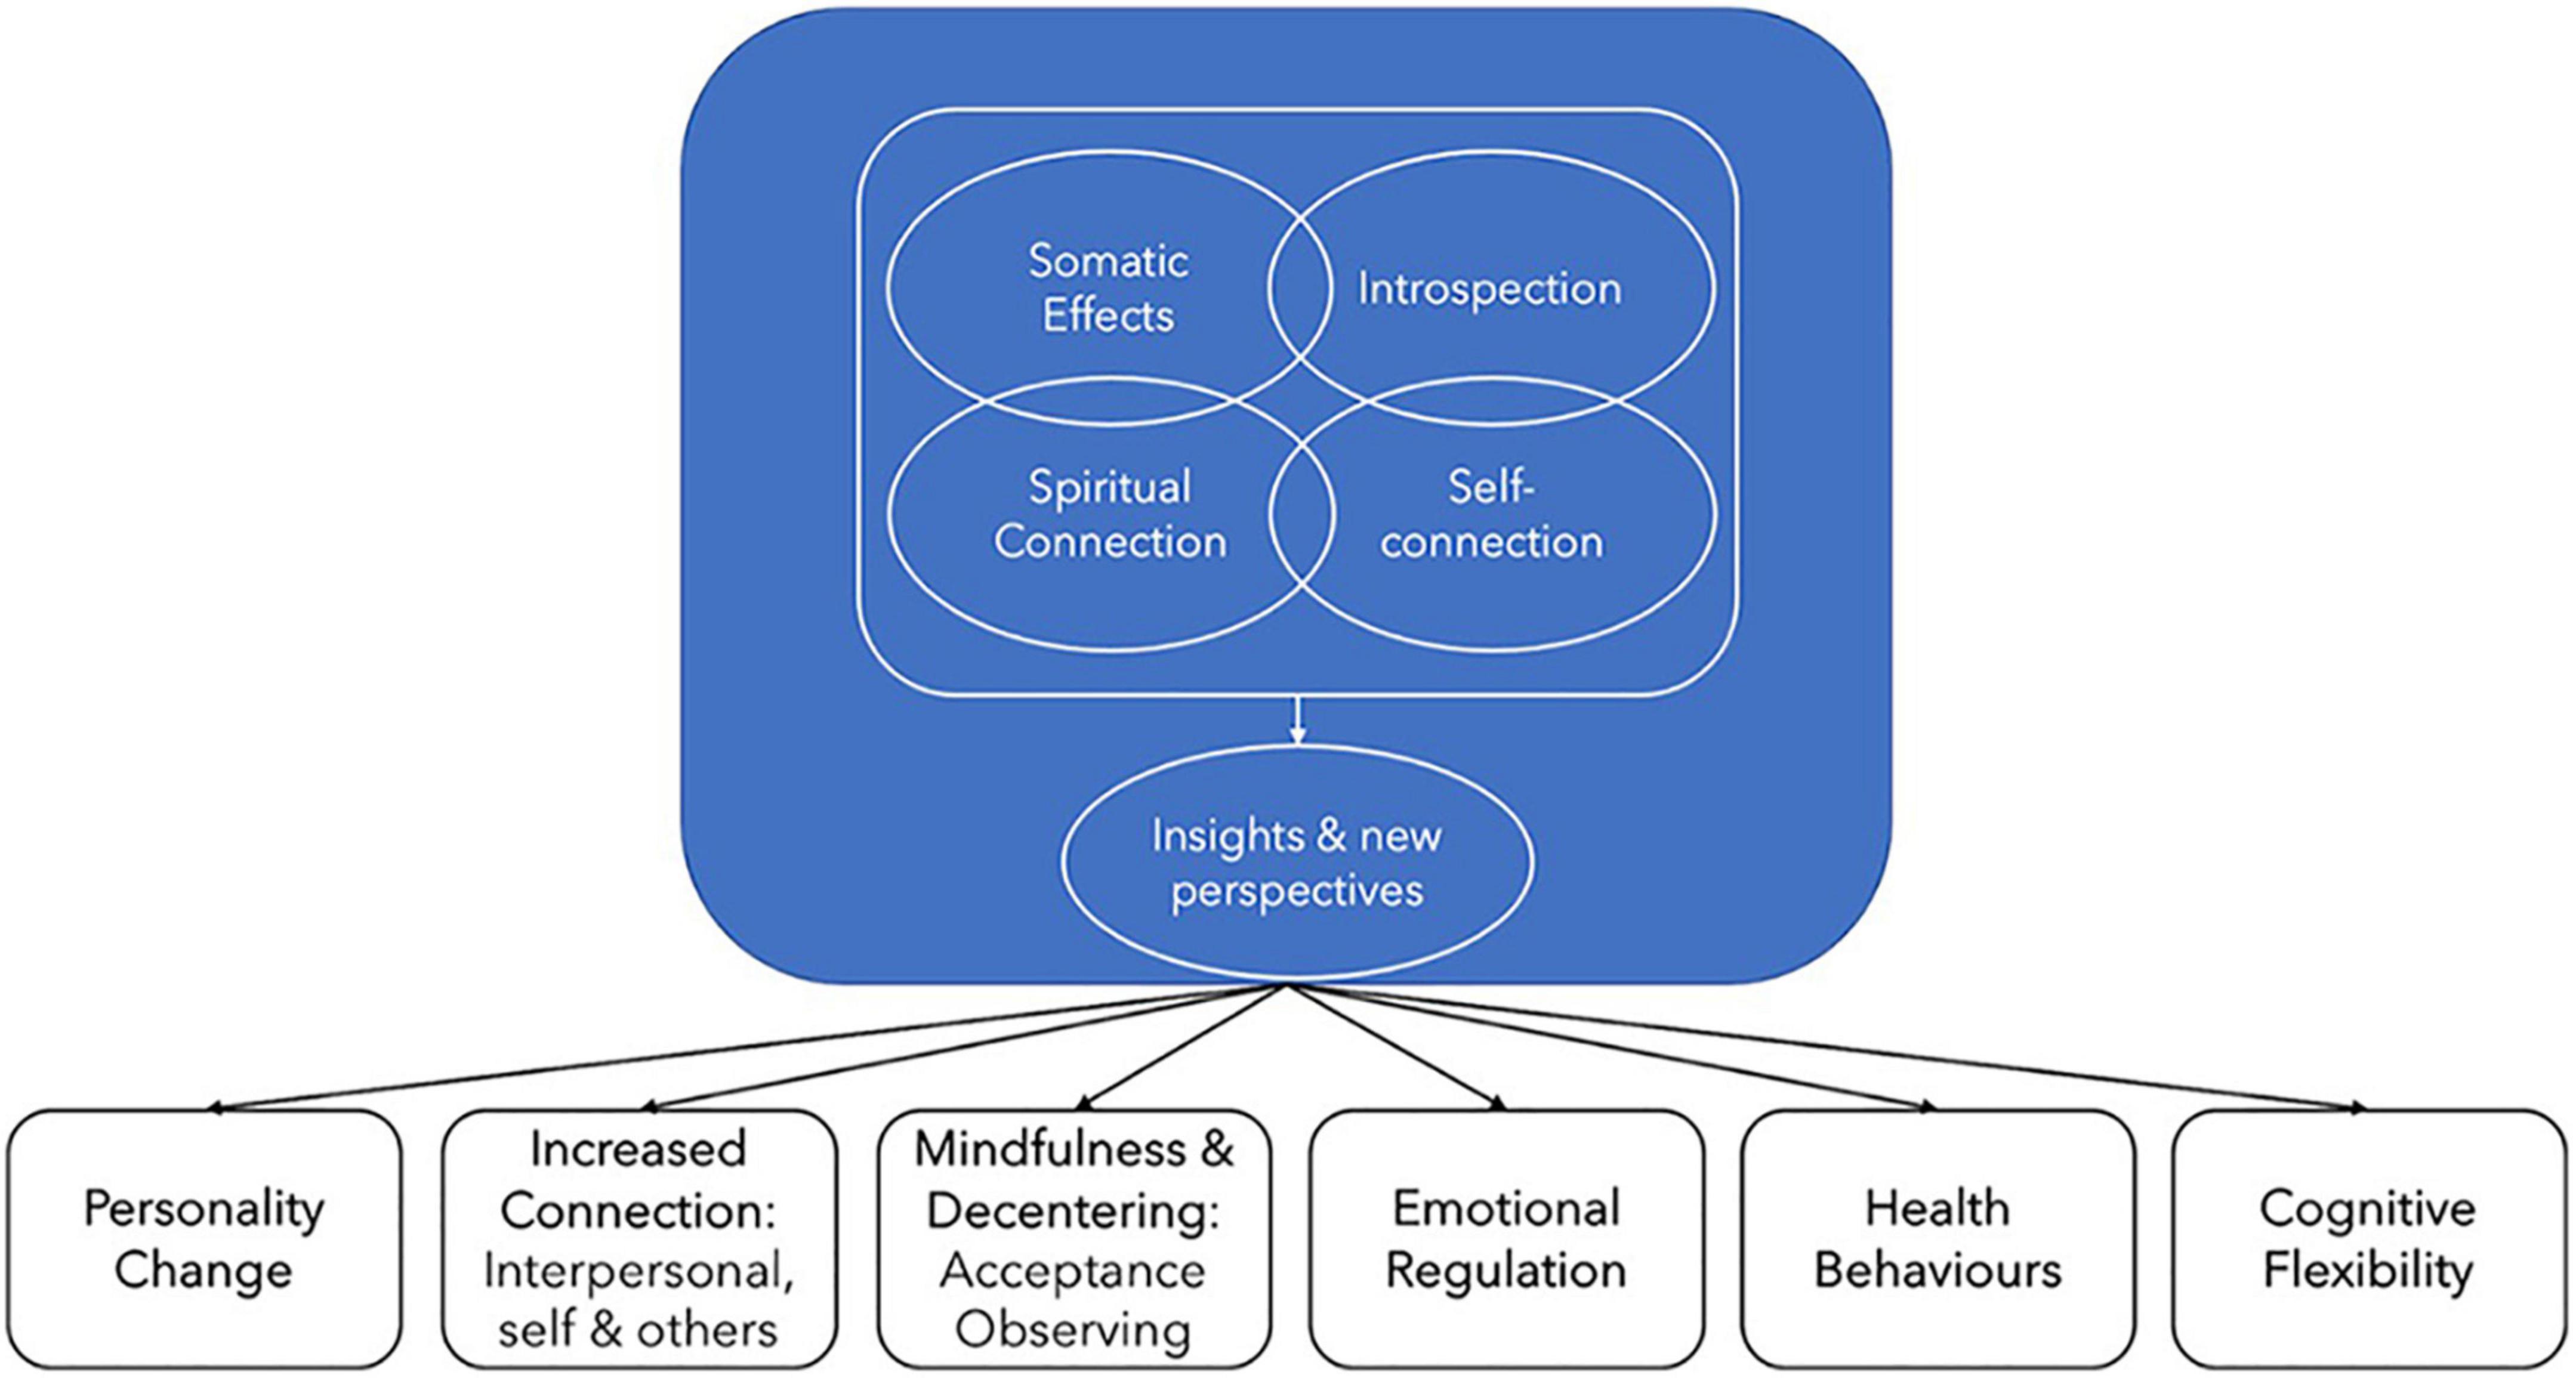 Psychotherapeutic and neurobiological processes associated with ayahuasca: A proposed model and implications for therapeutic use